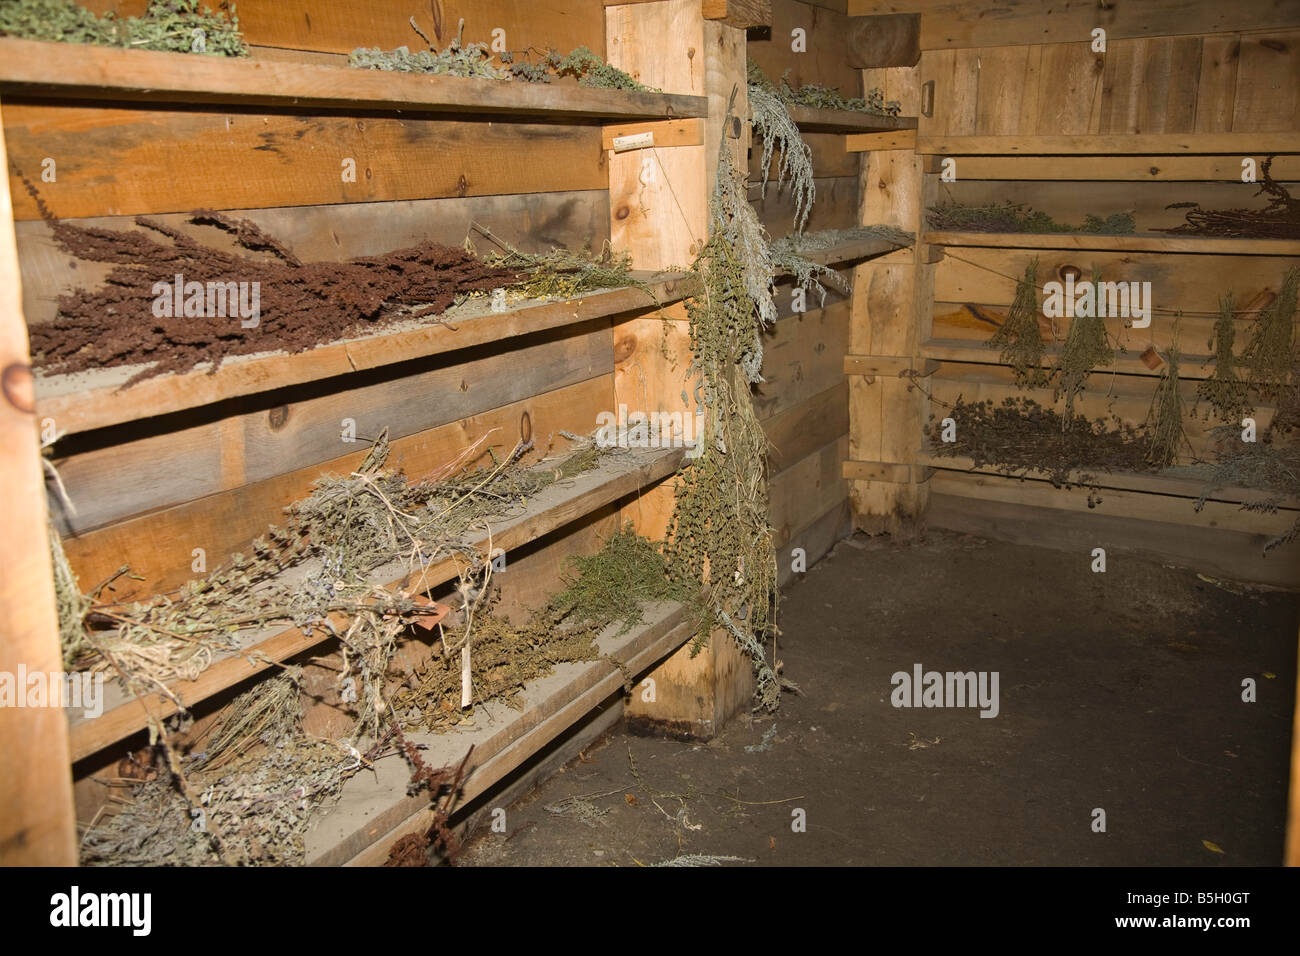 Drying of herbs and grasses at Huron Indian Native American Aboriginal Village in Midland,Ontario,Canada Stock Photo